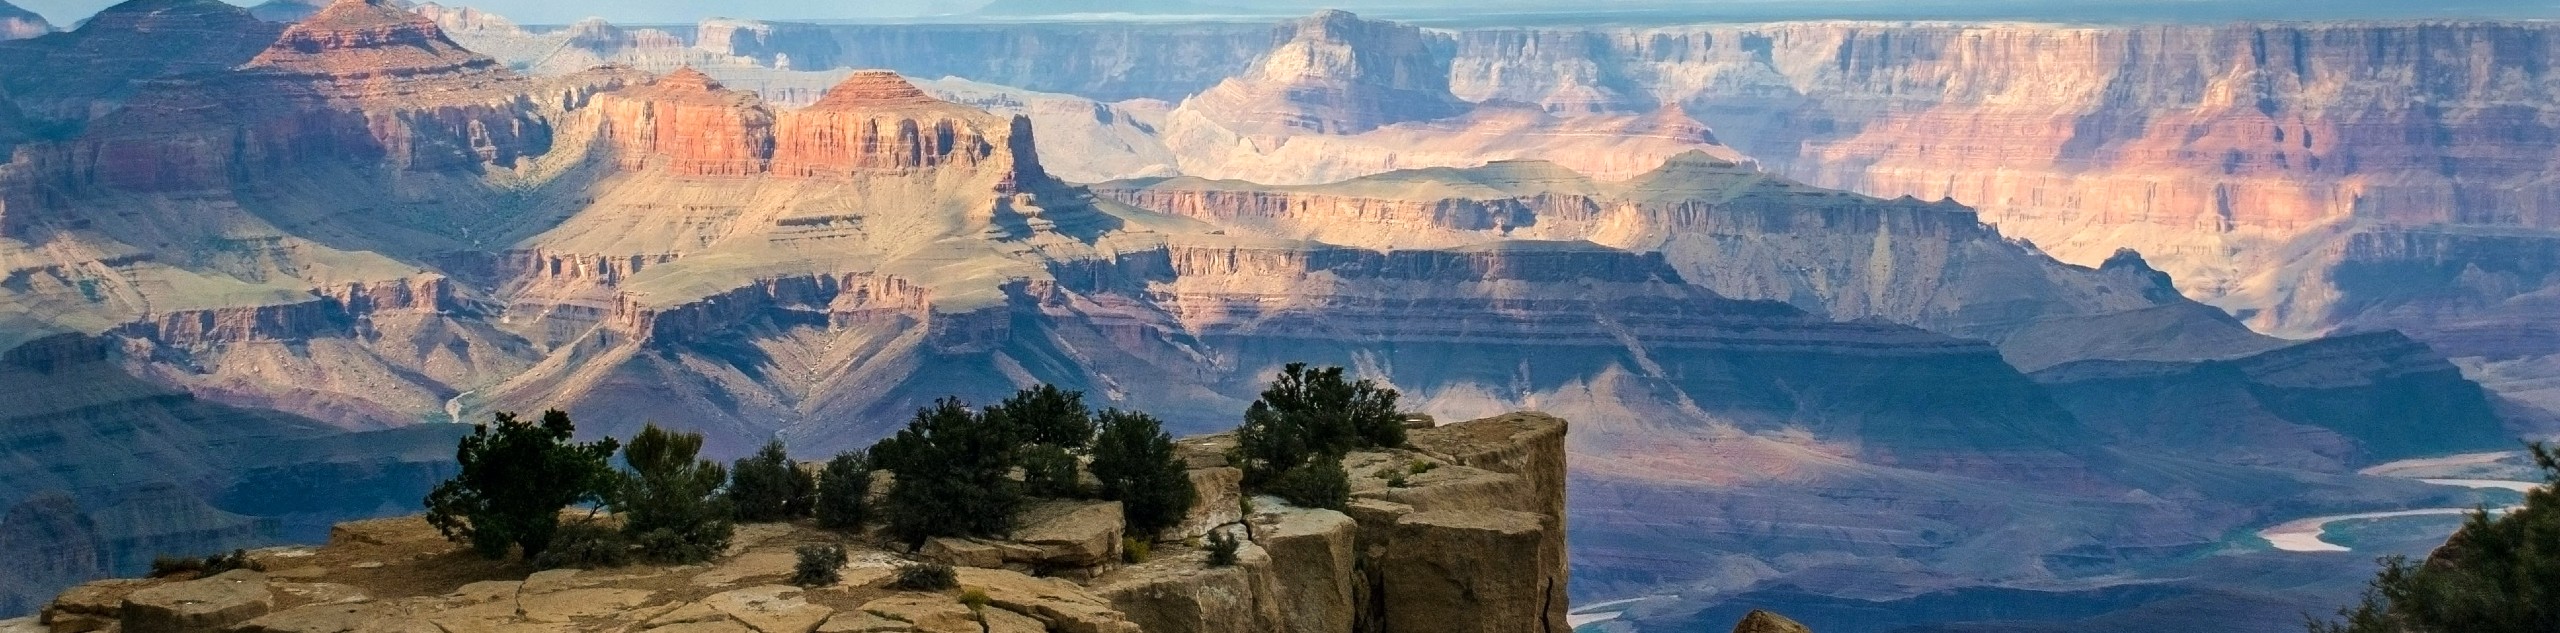 Grand Canyon in the USA